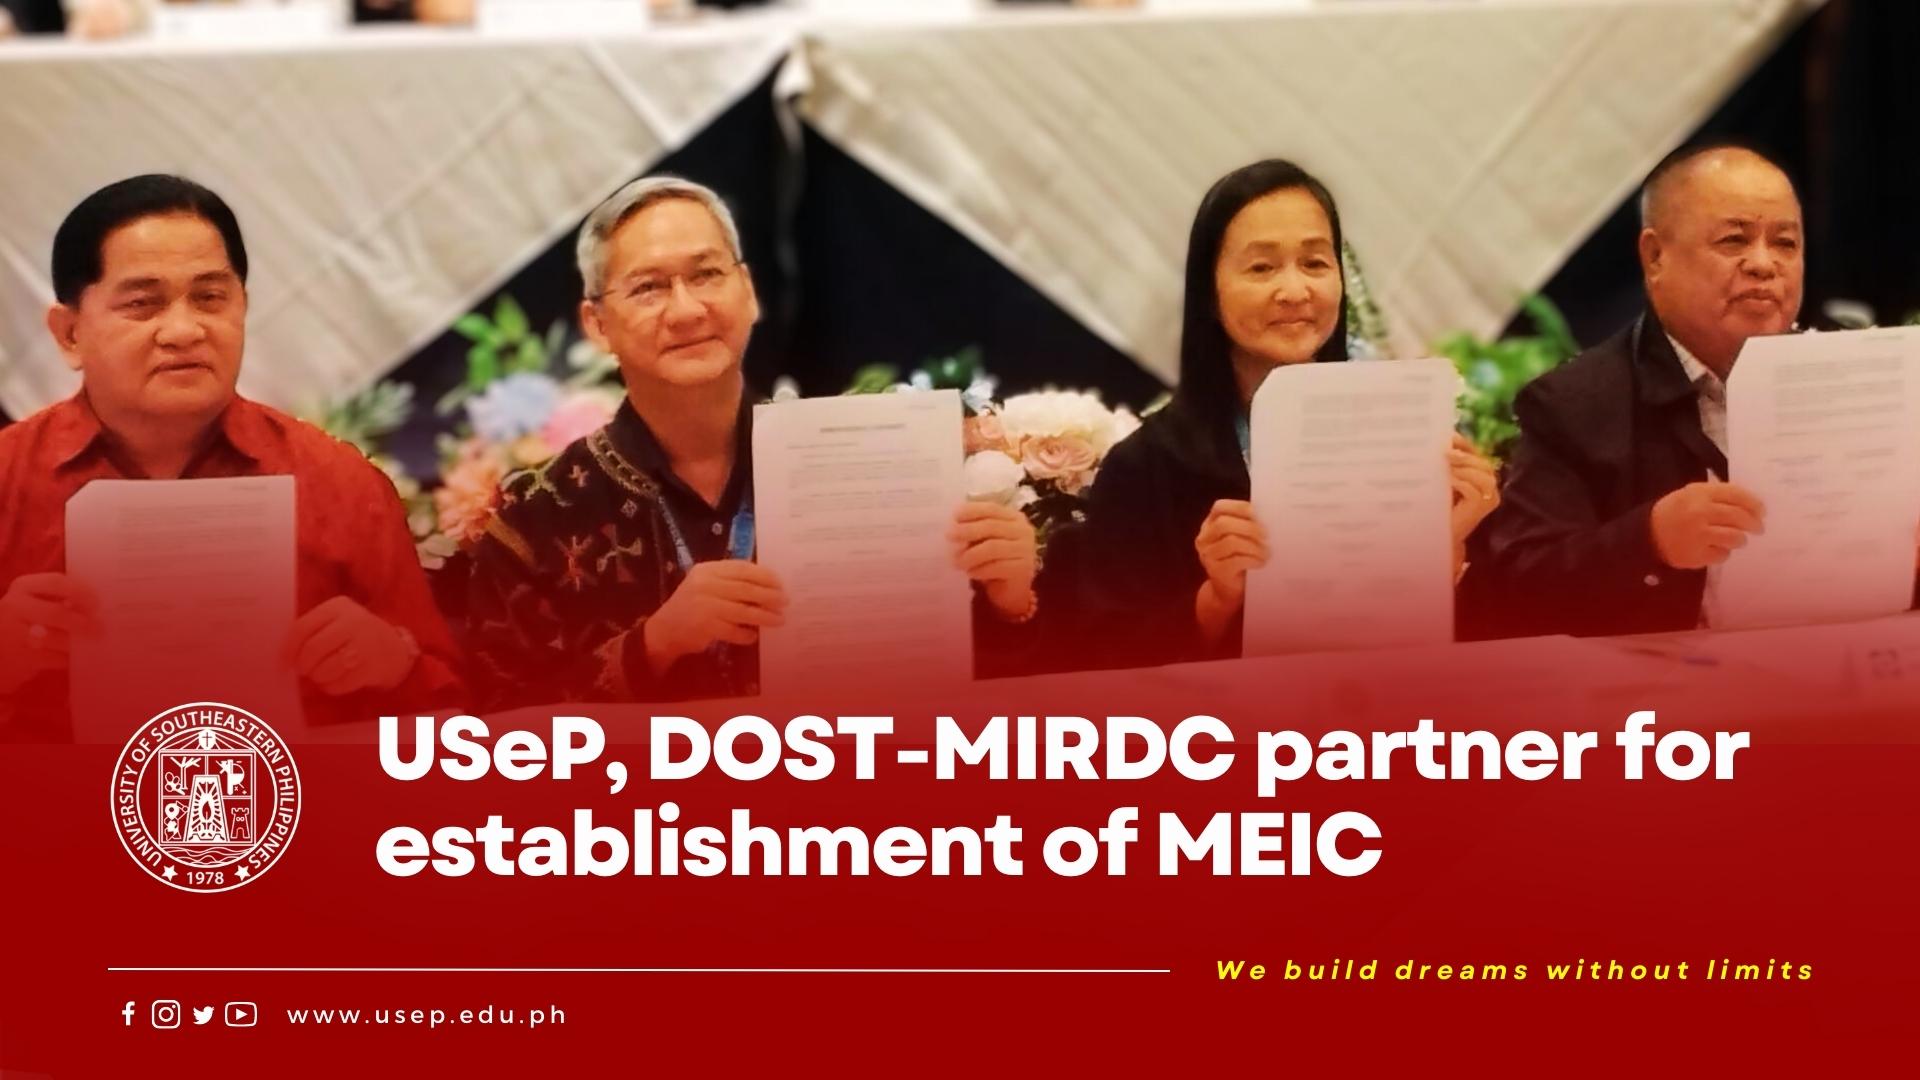 USeP, DOST-MIRDC partner for establishment of MEIC